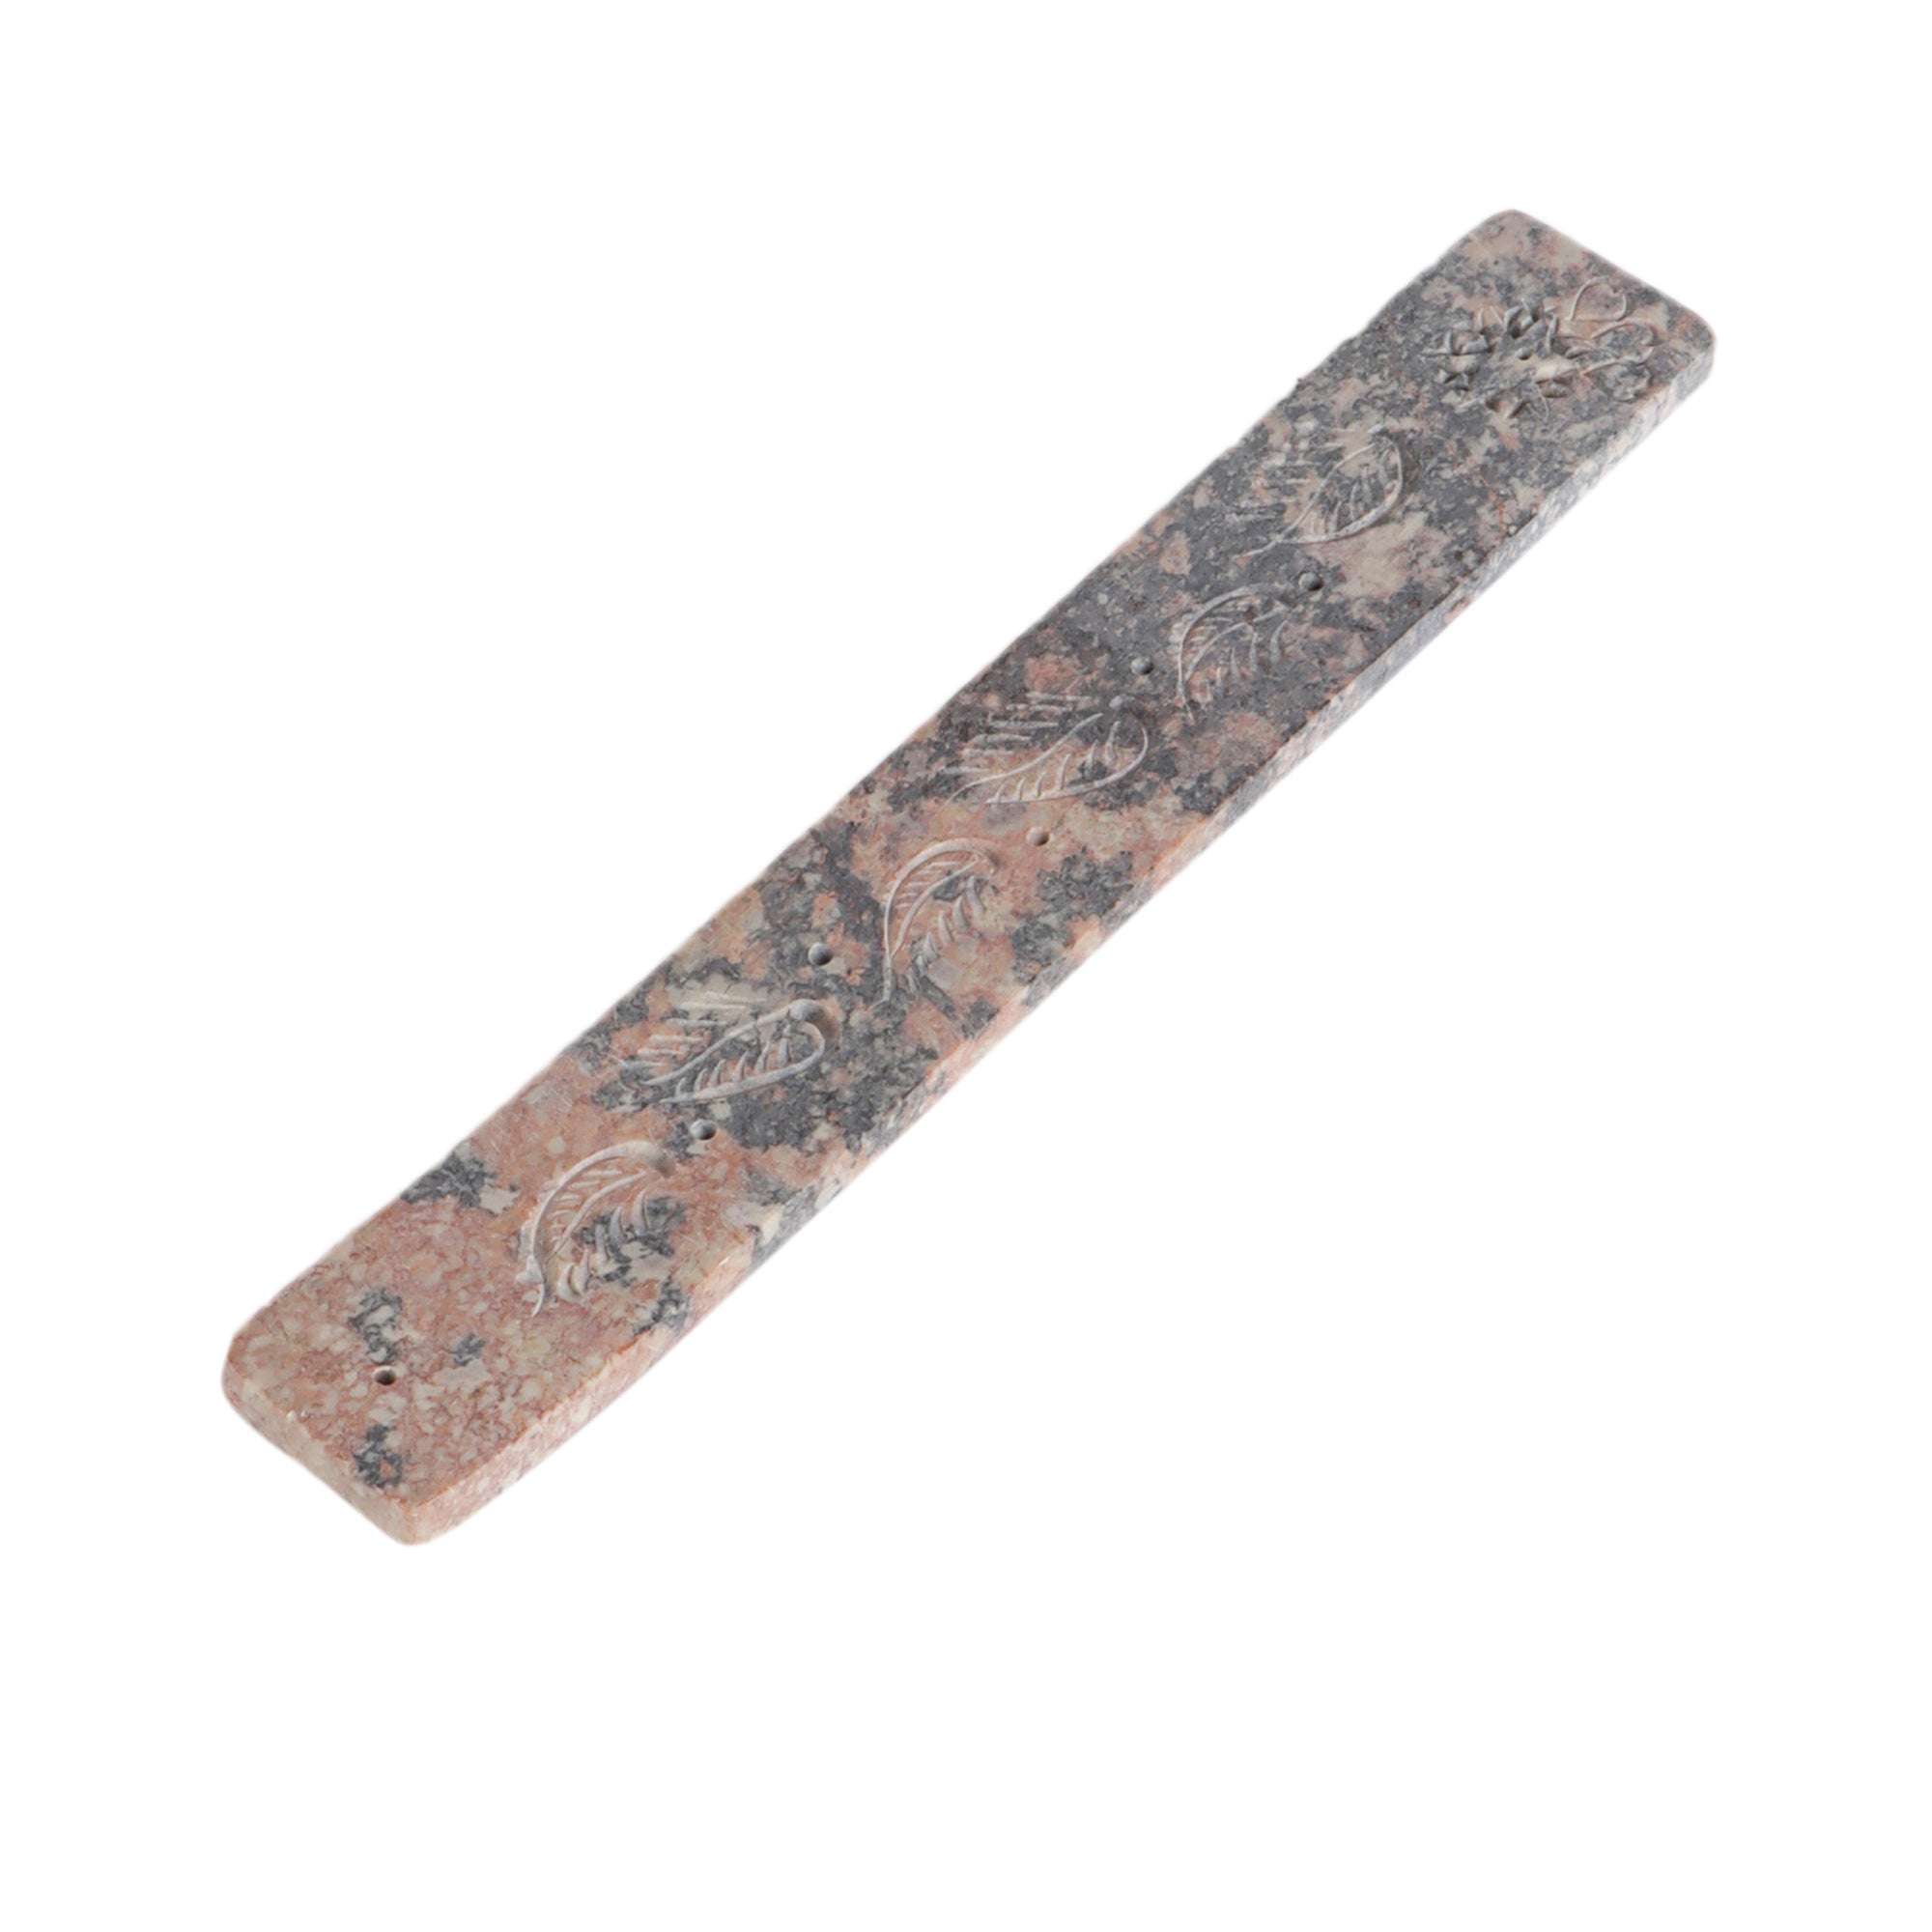 The Marble Slate - Incense Holder (Pink and Grey)